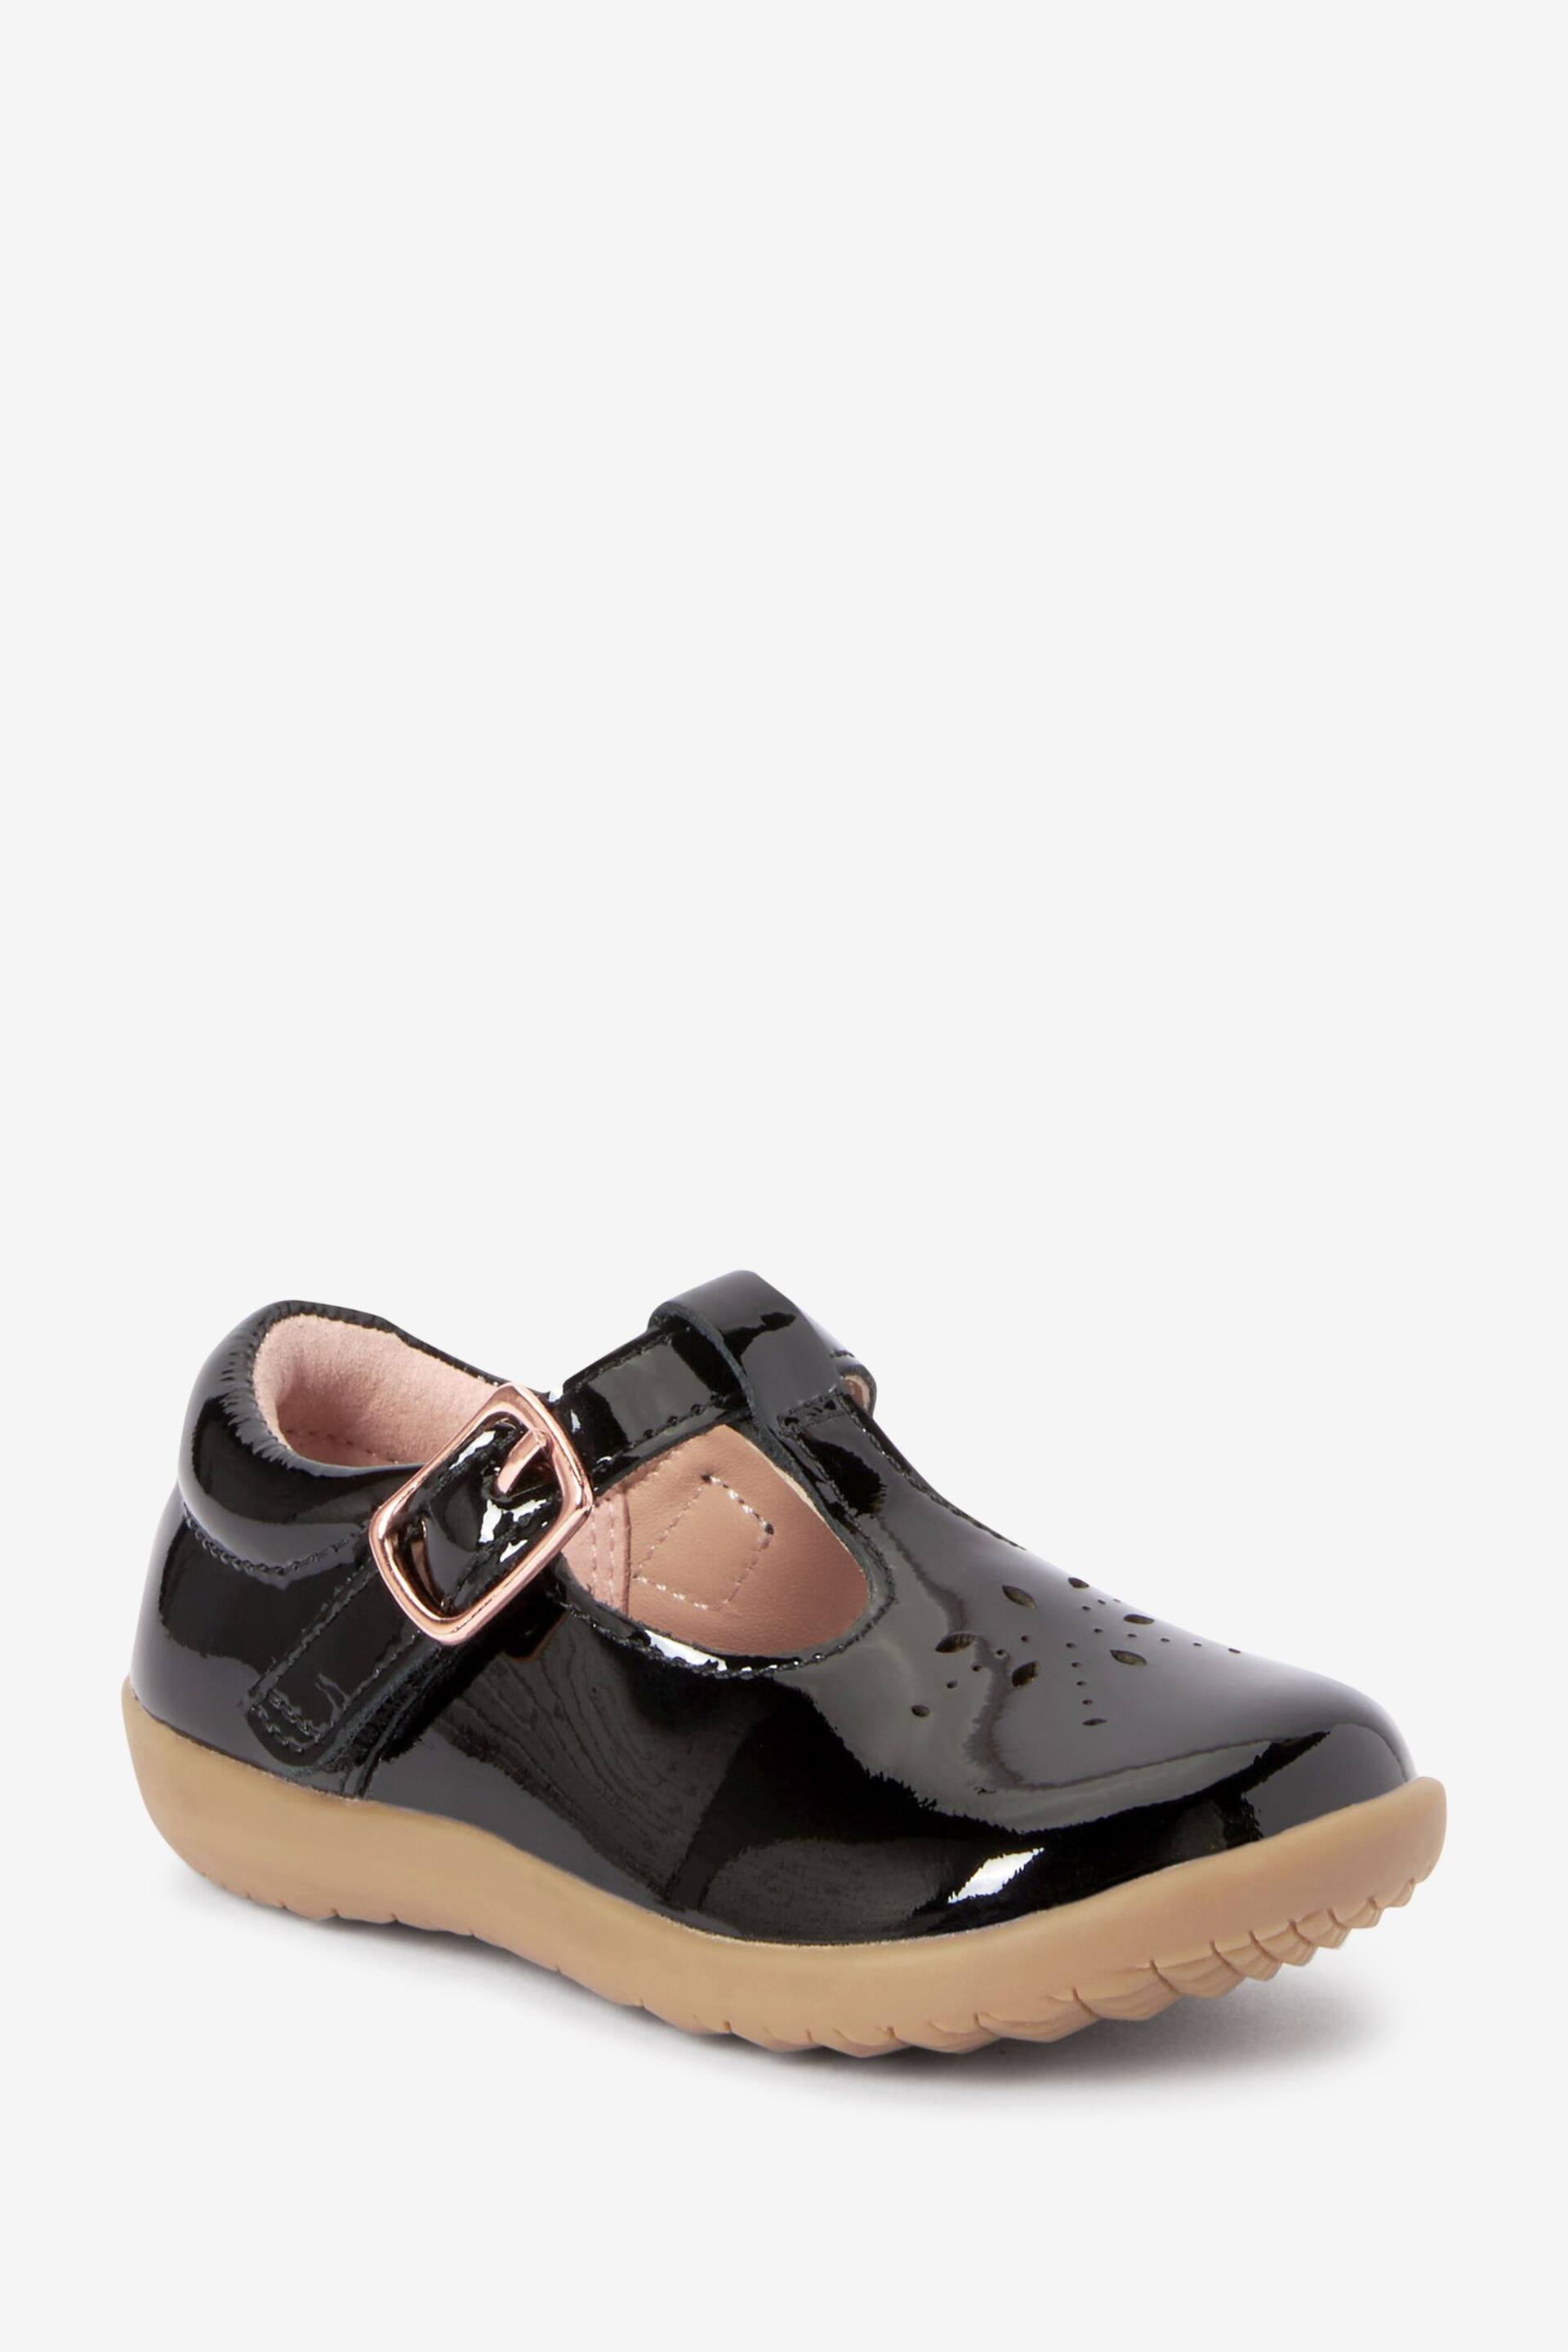 Black Patent Leather Standard Fit (F) First Walker T-Bar Shoes - Image 2 of 4